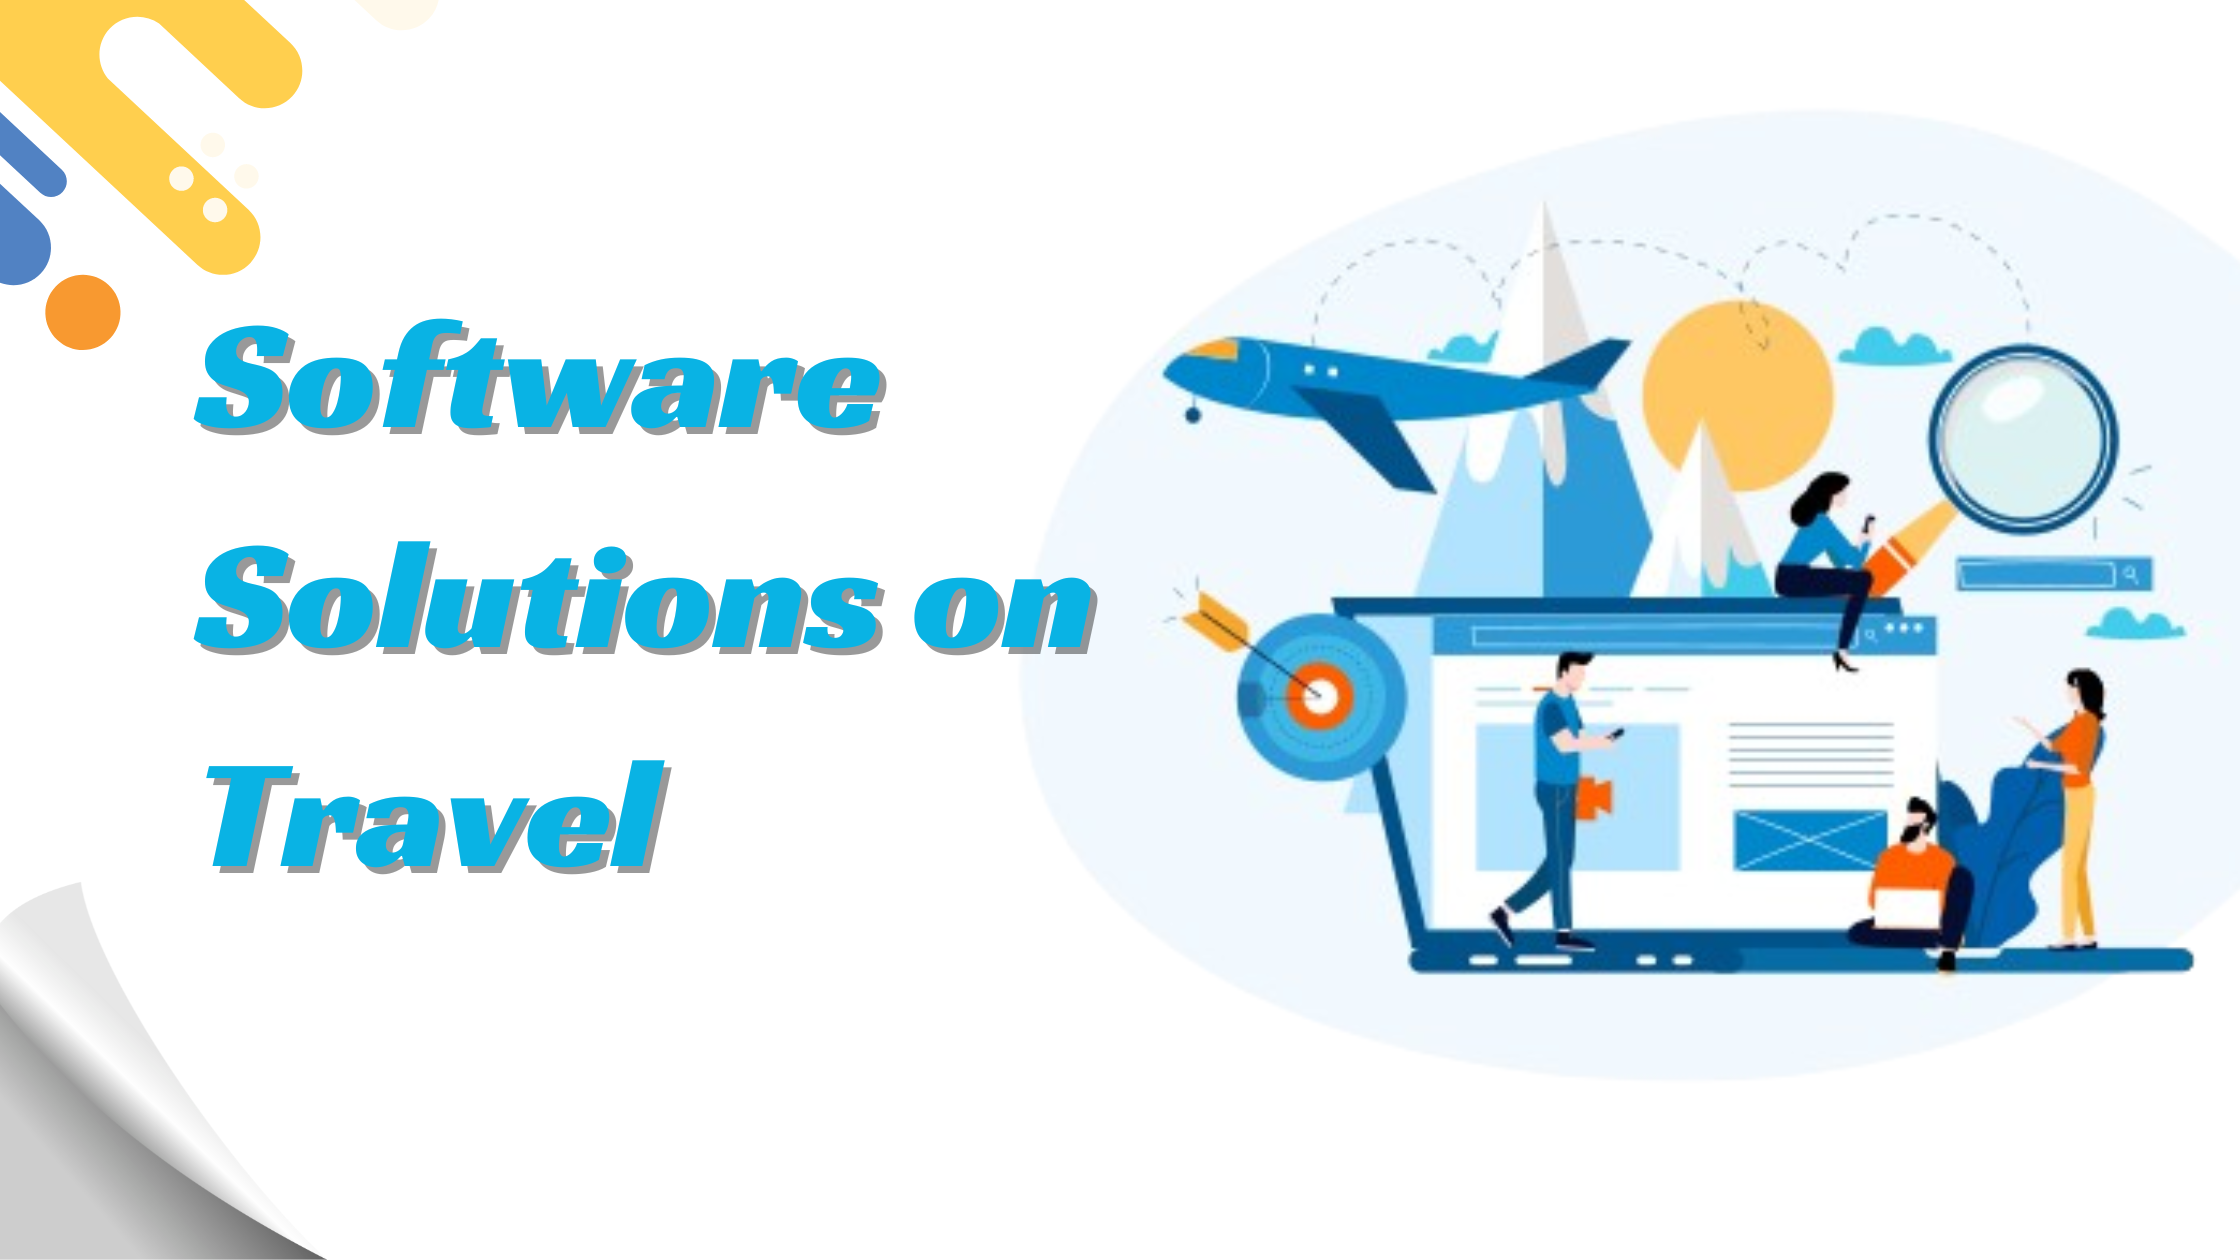 Software Solutions on Travel